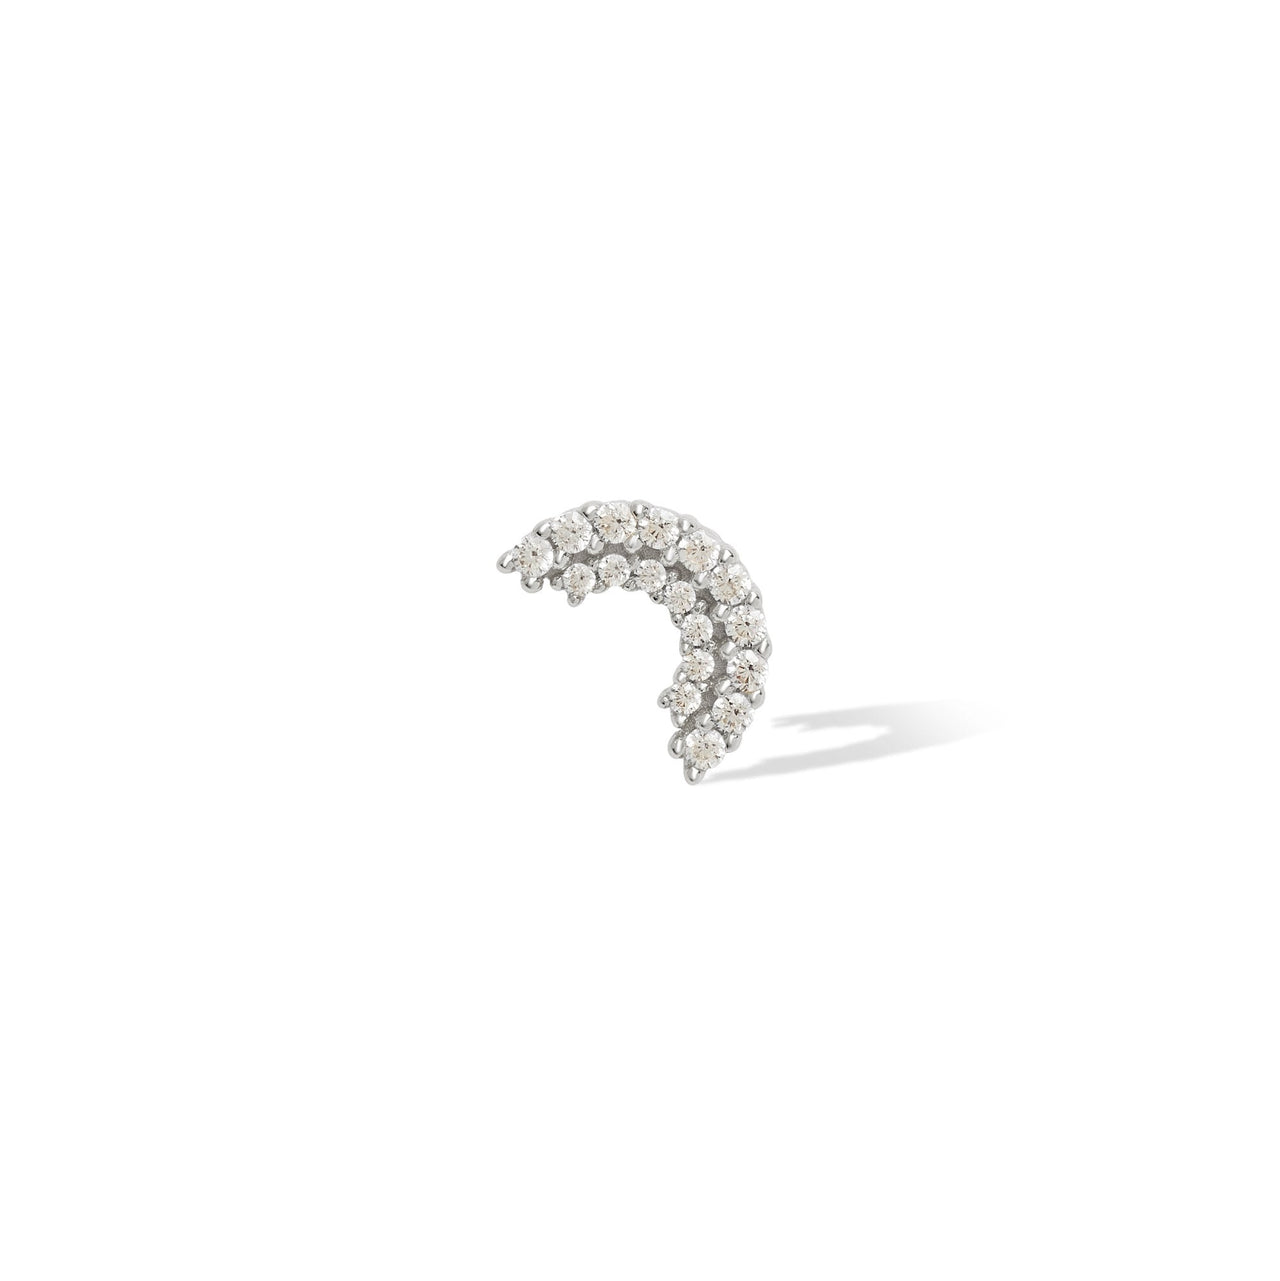 Single earring Double half circle sterling silver stud (ball screw)